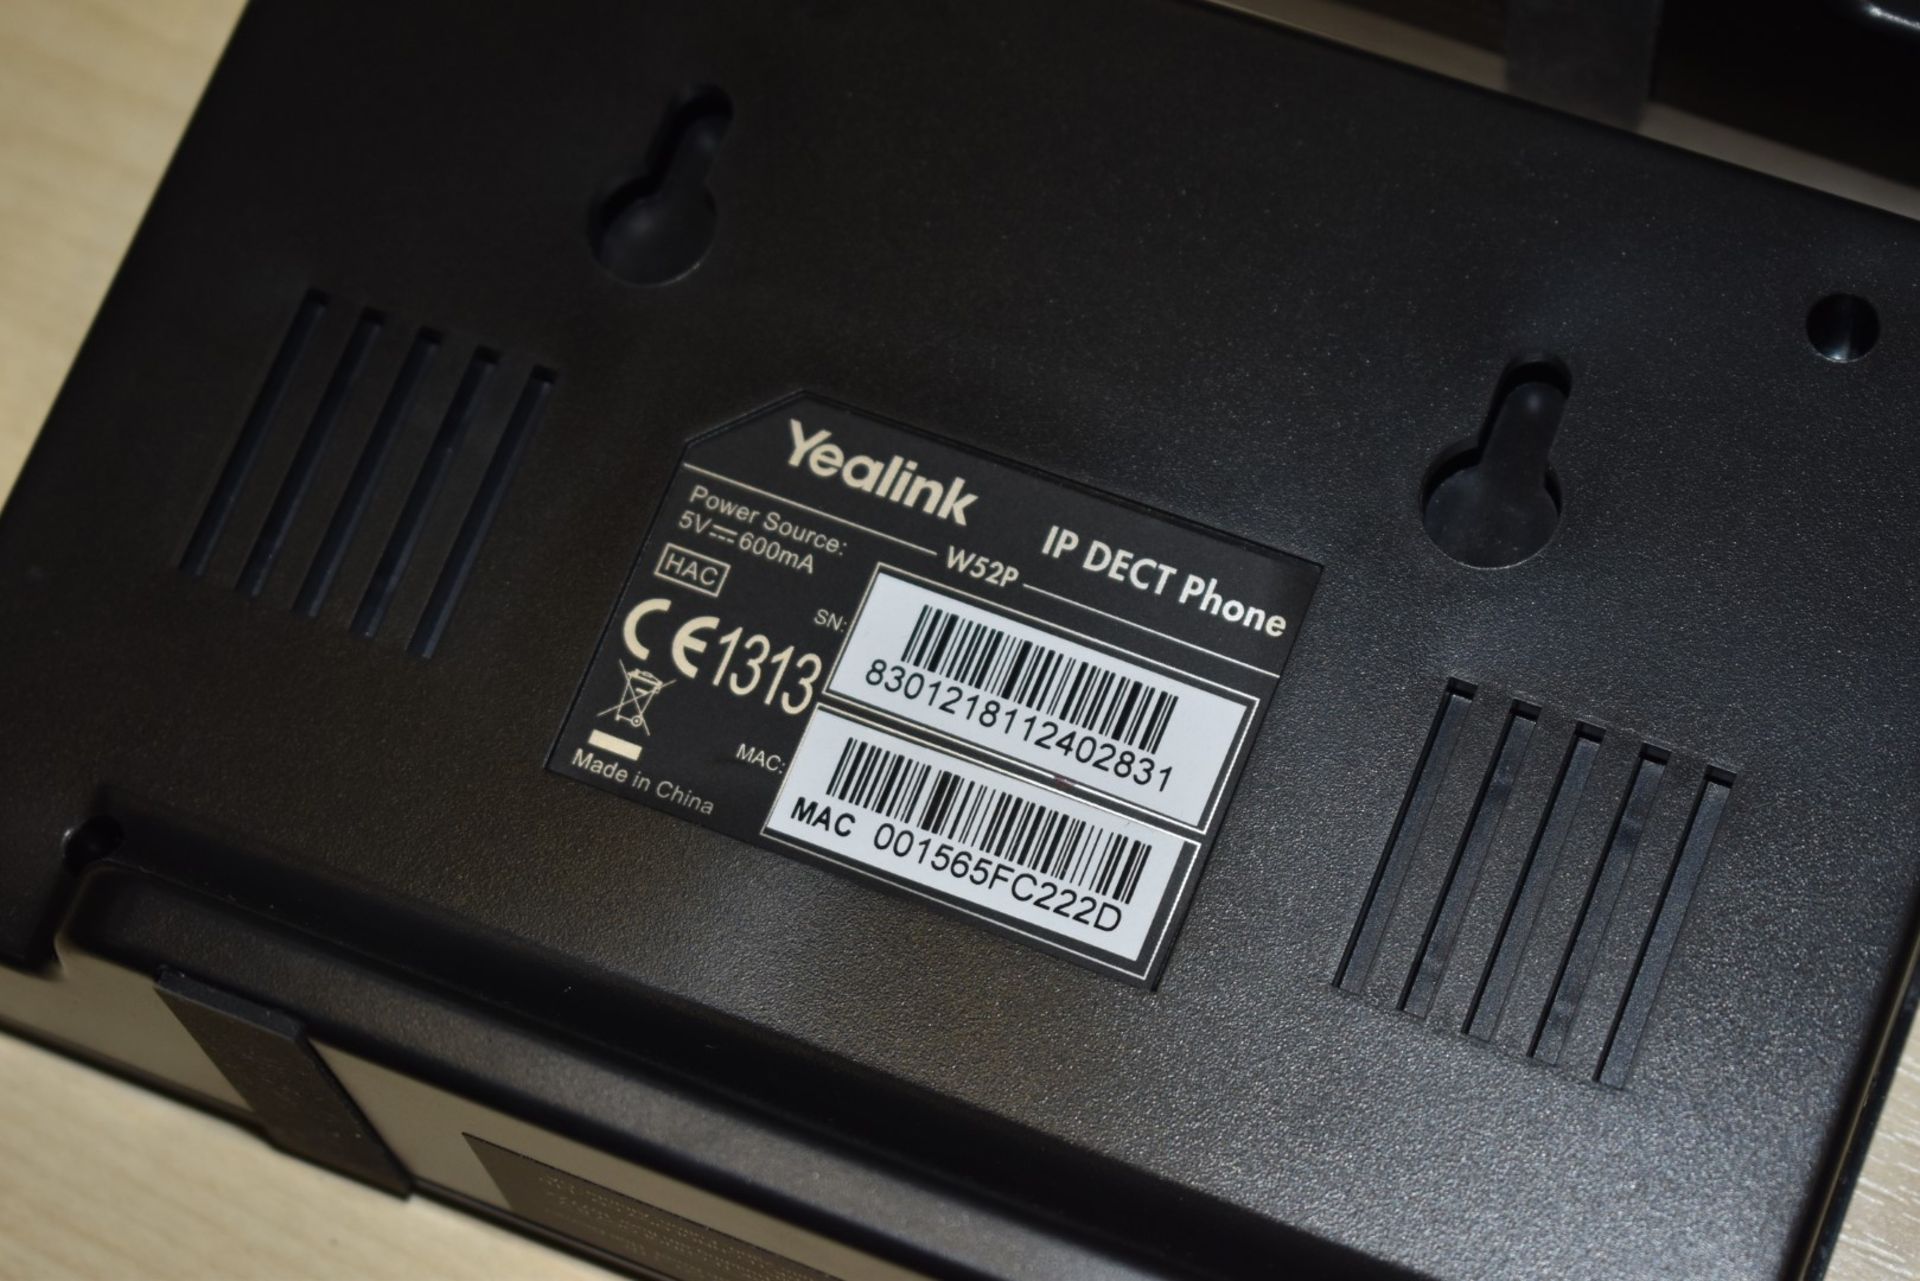 3 x Yealink IP Dect Phone Model W52P - Includes One PSU Only - Ref: In2124 wh1 pal1 - CL011 - - Image 7 of 7